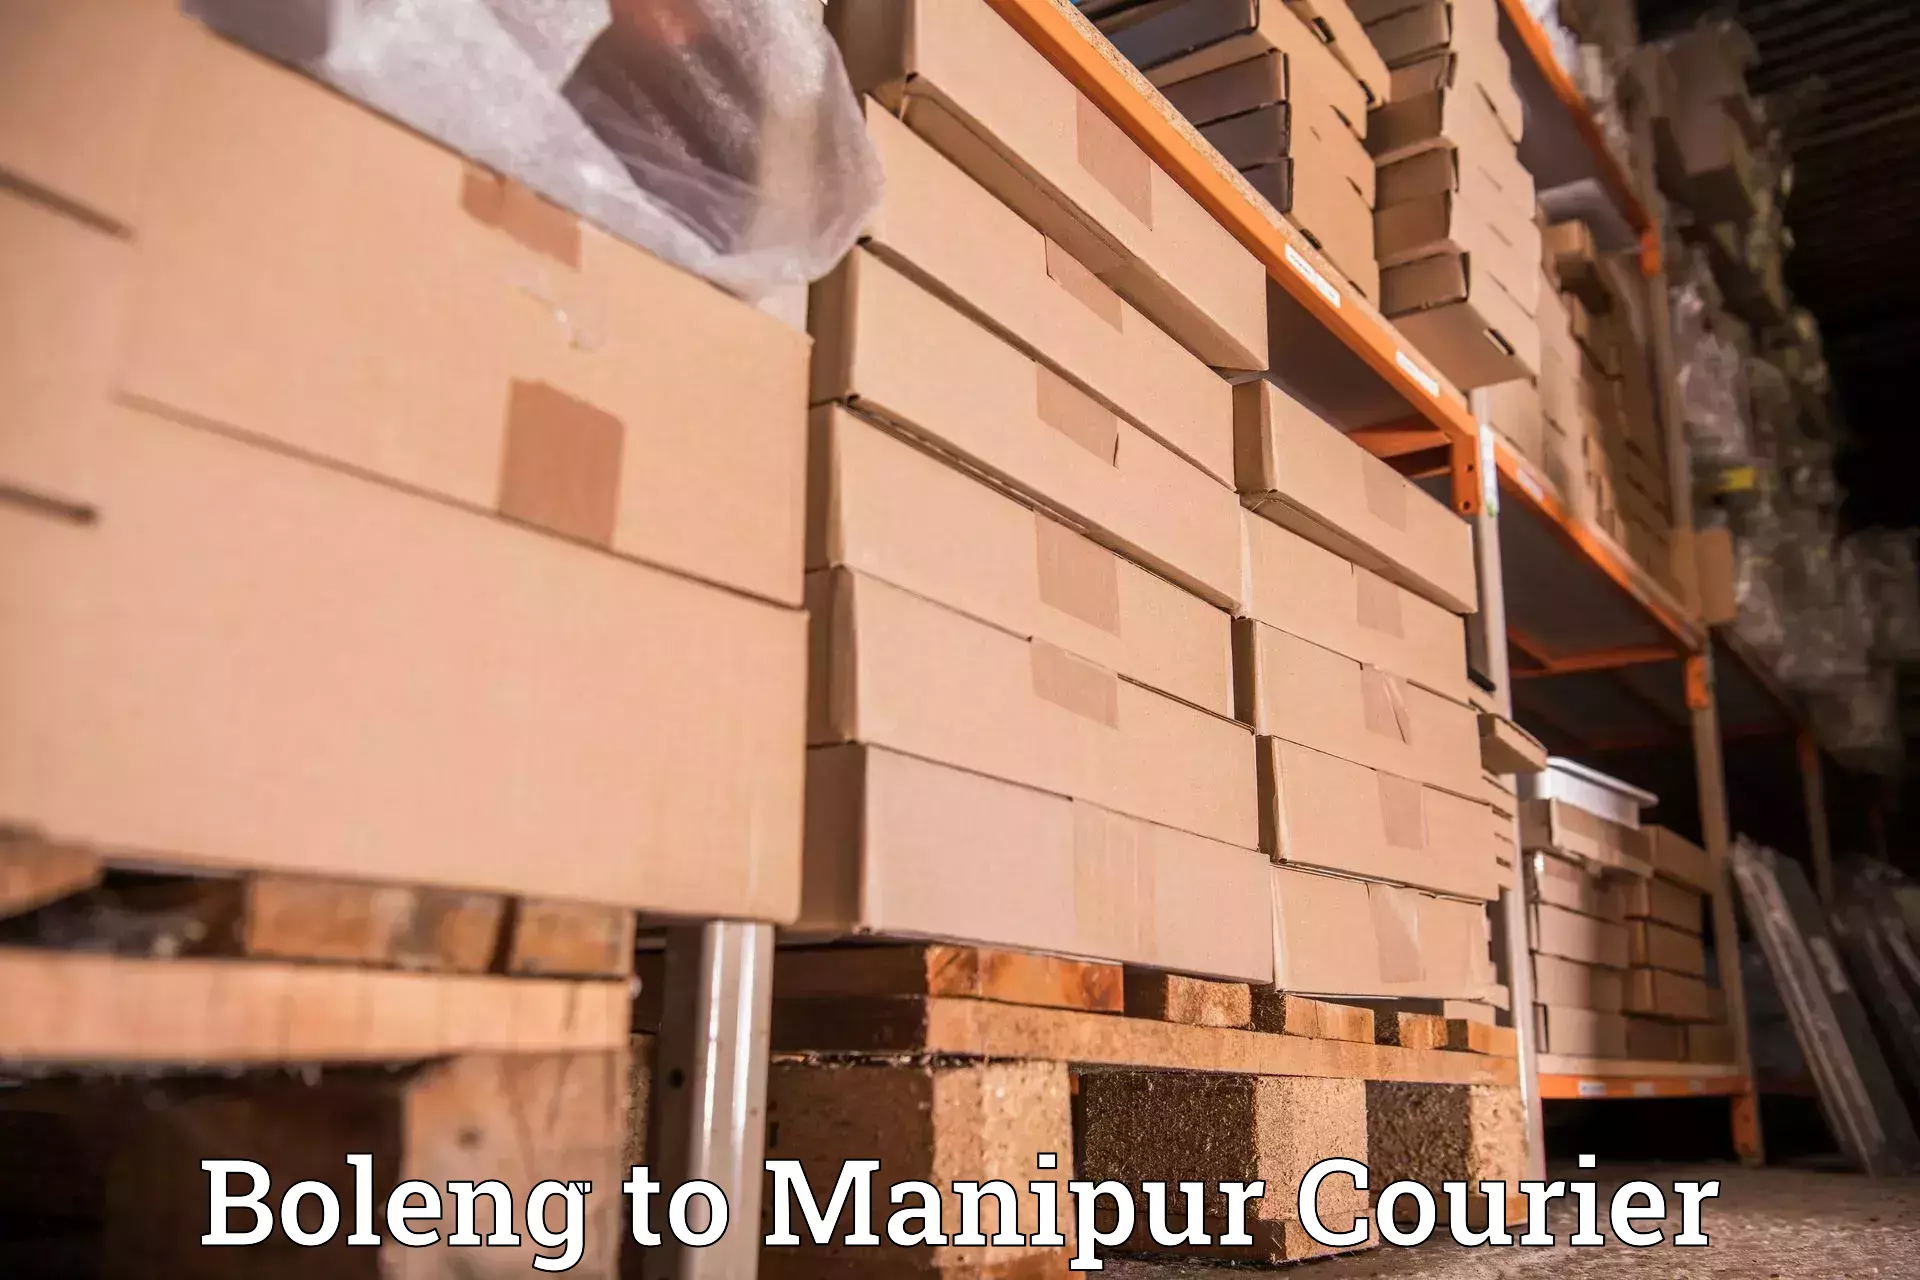 Global shipping networks Boleng to Manipur